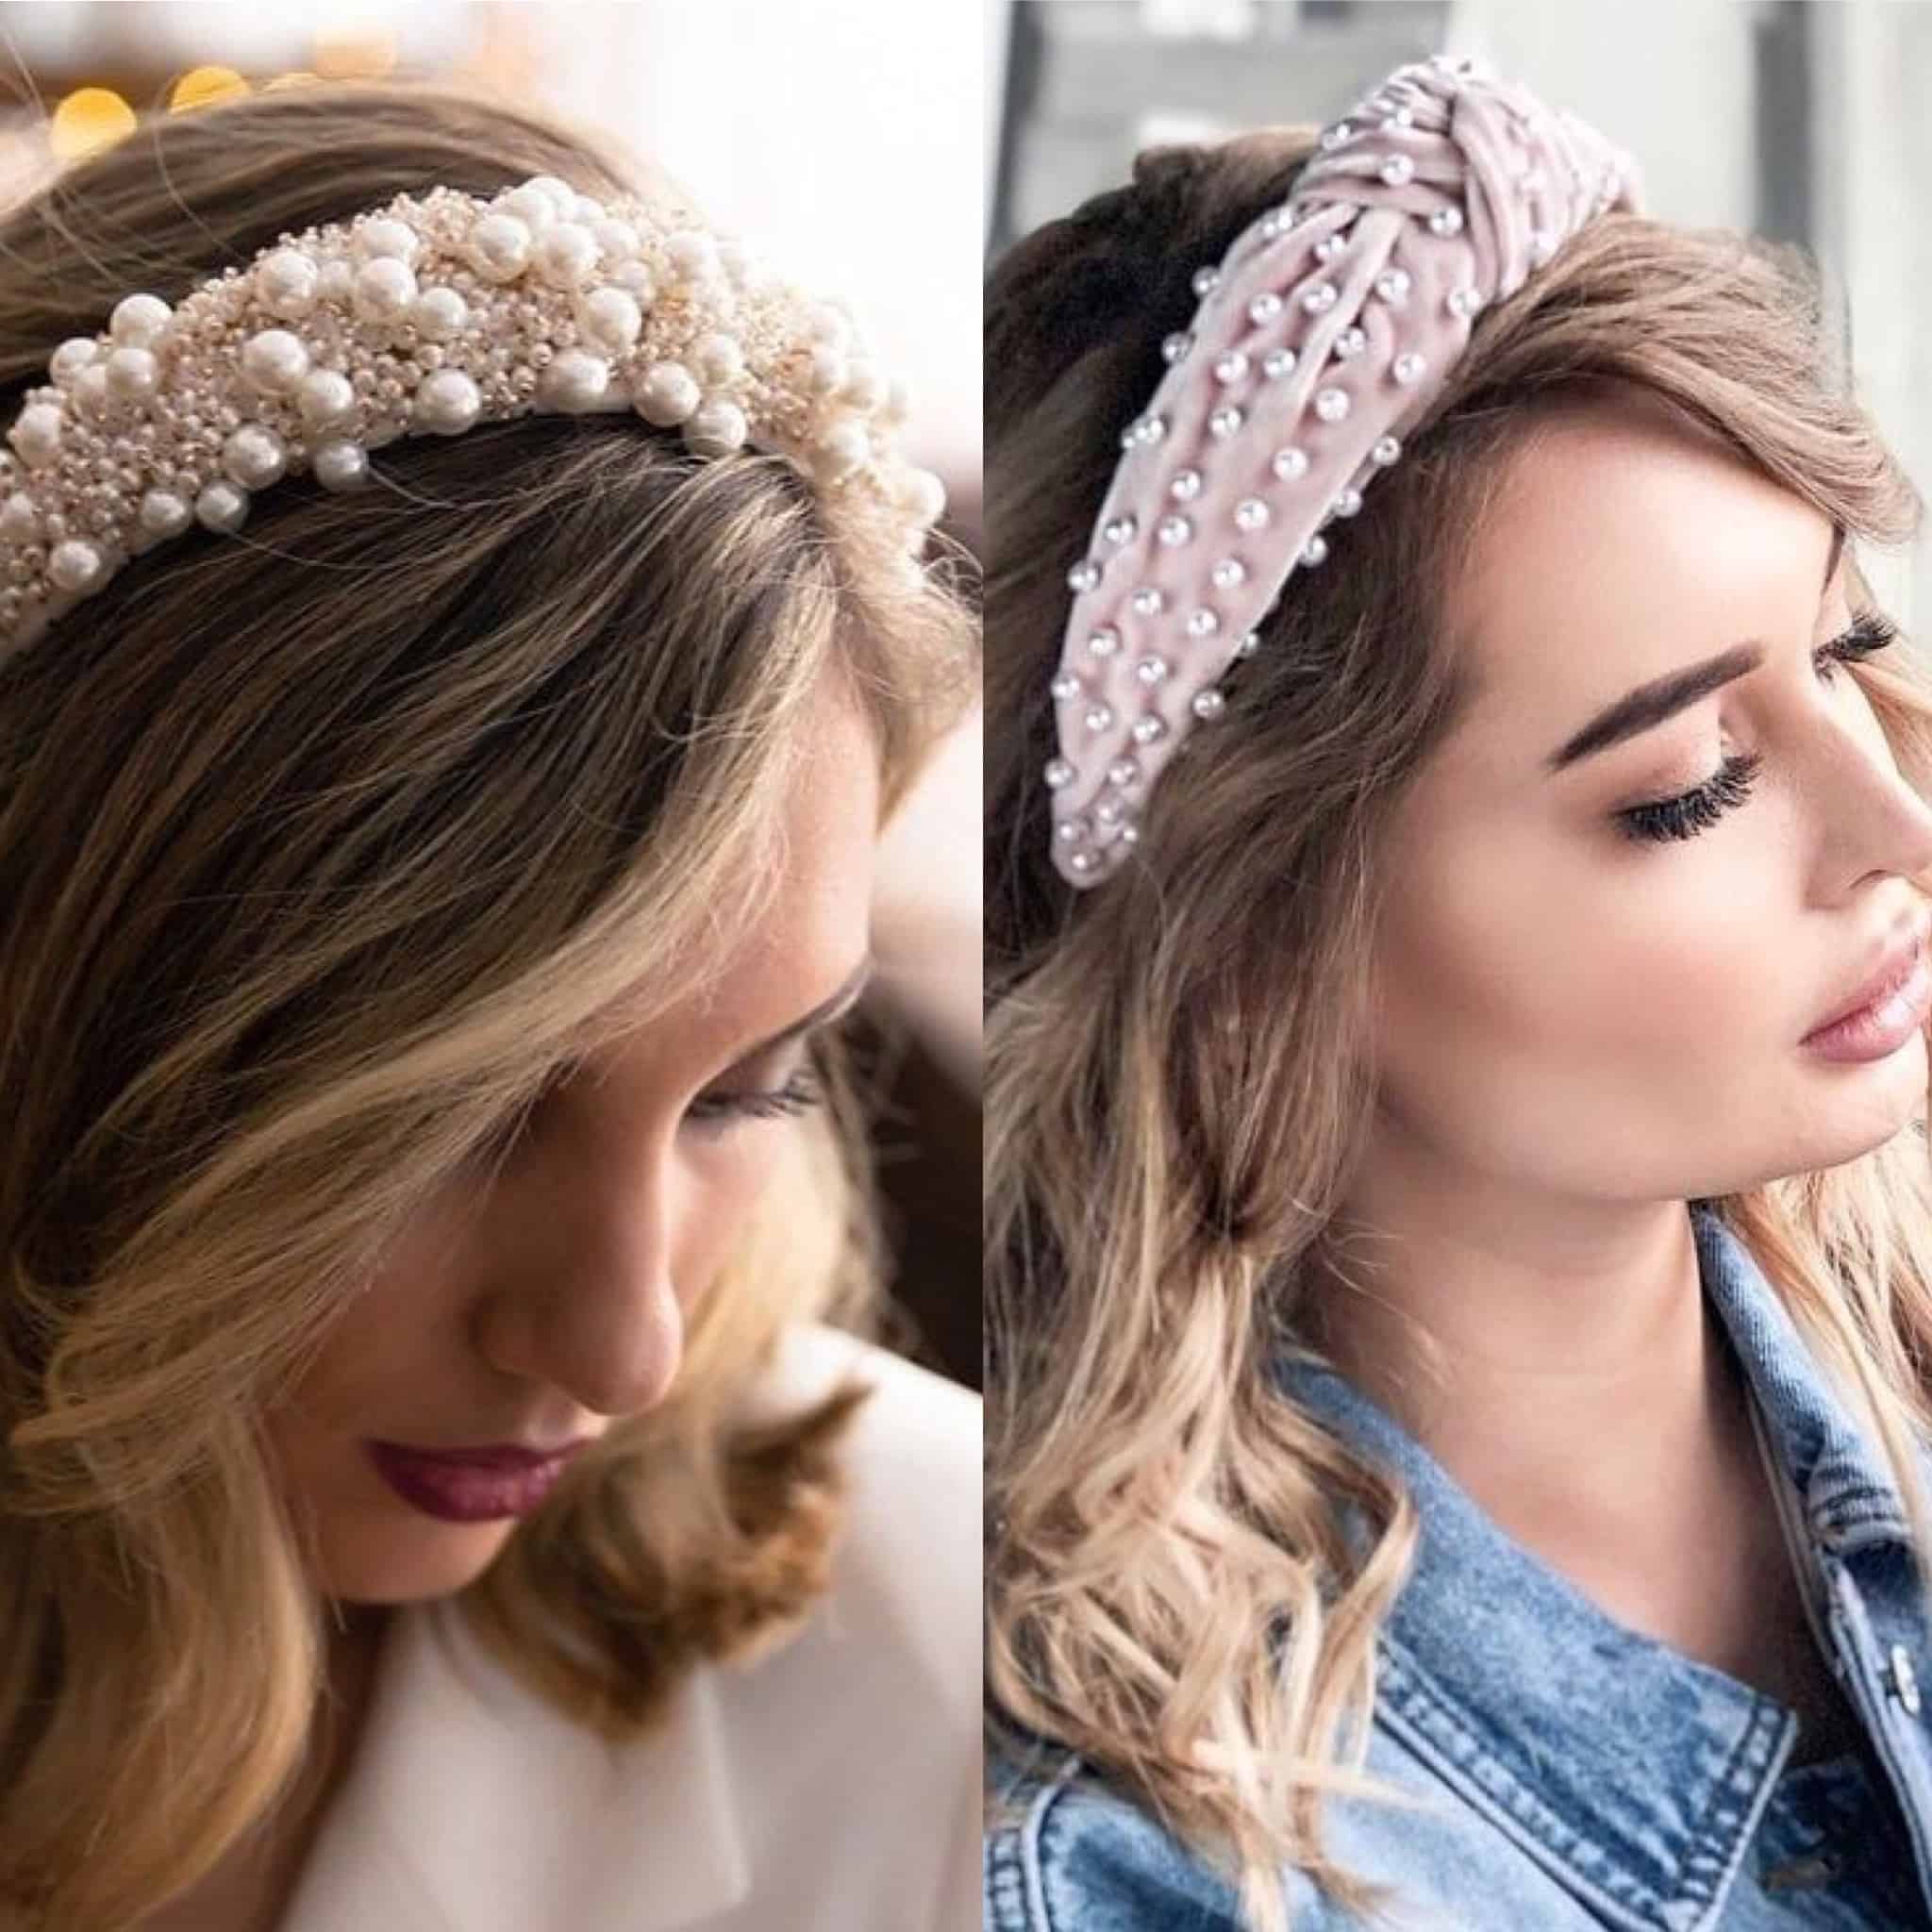 Hottest New Year's Fashion Hair Accessories